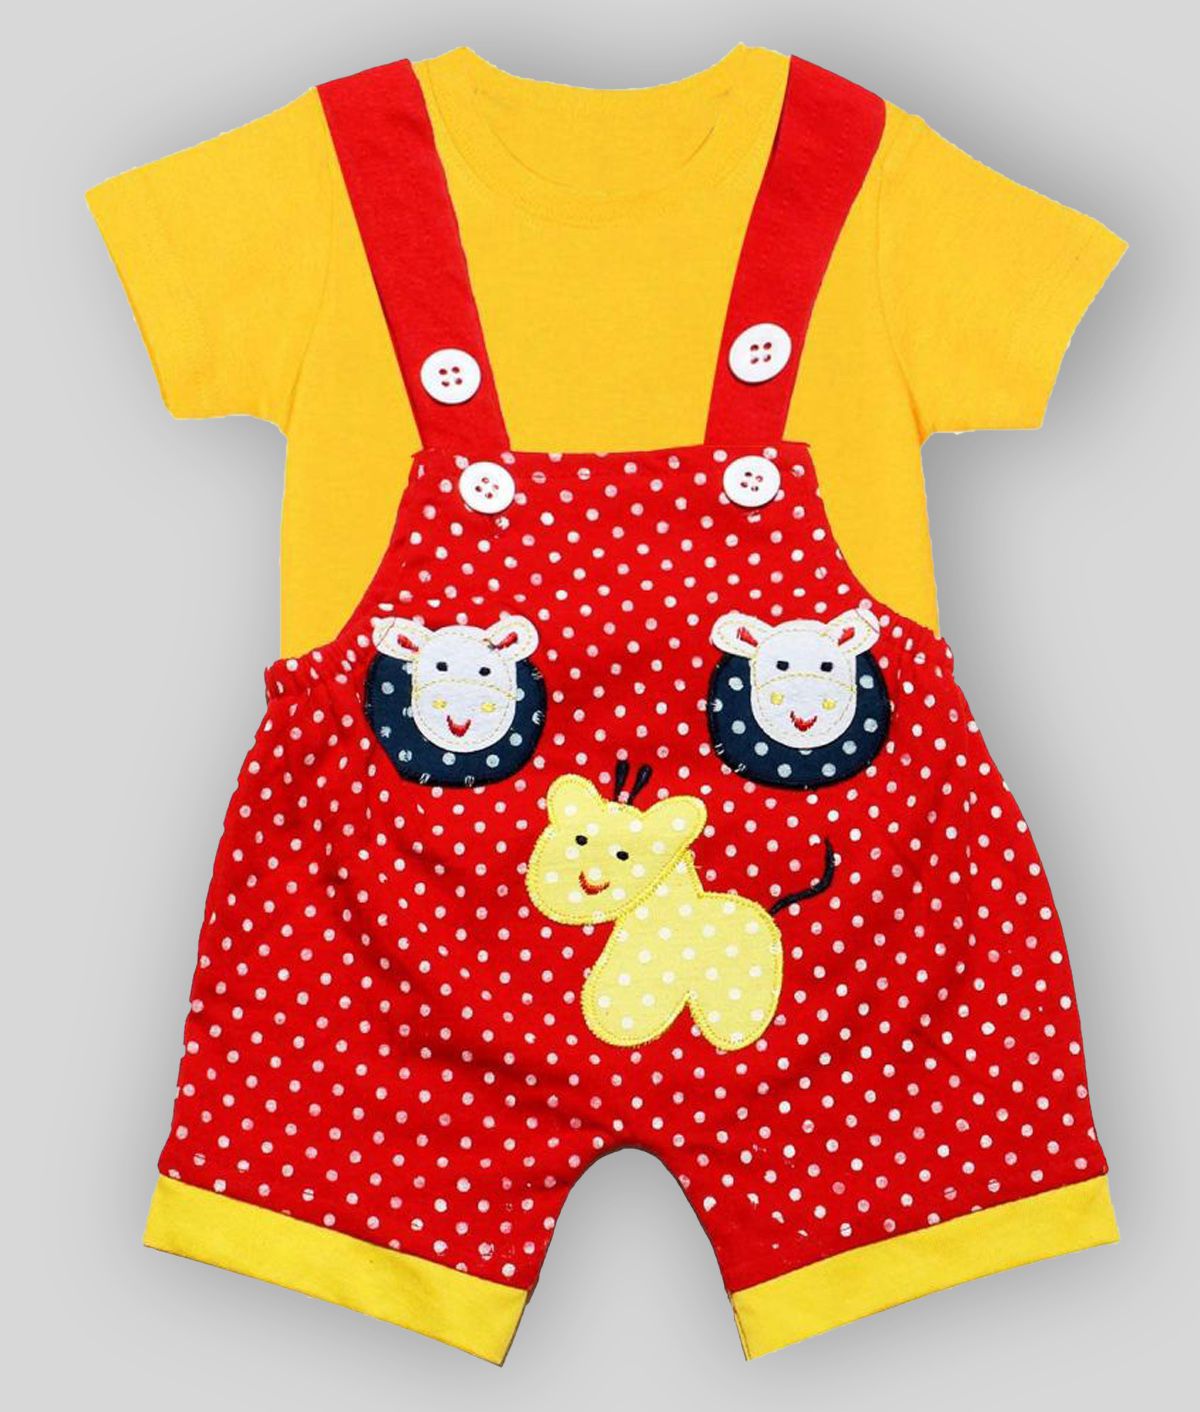     			babeezworld dungaree for Boys & Girls casual printed pure cotton (Yellow & Red; 0-3 Months)